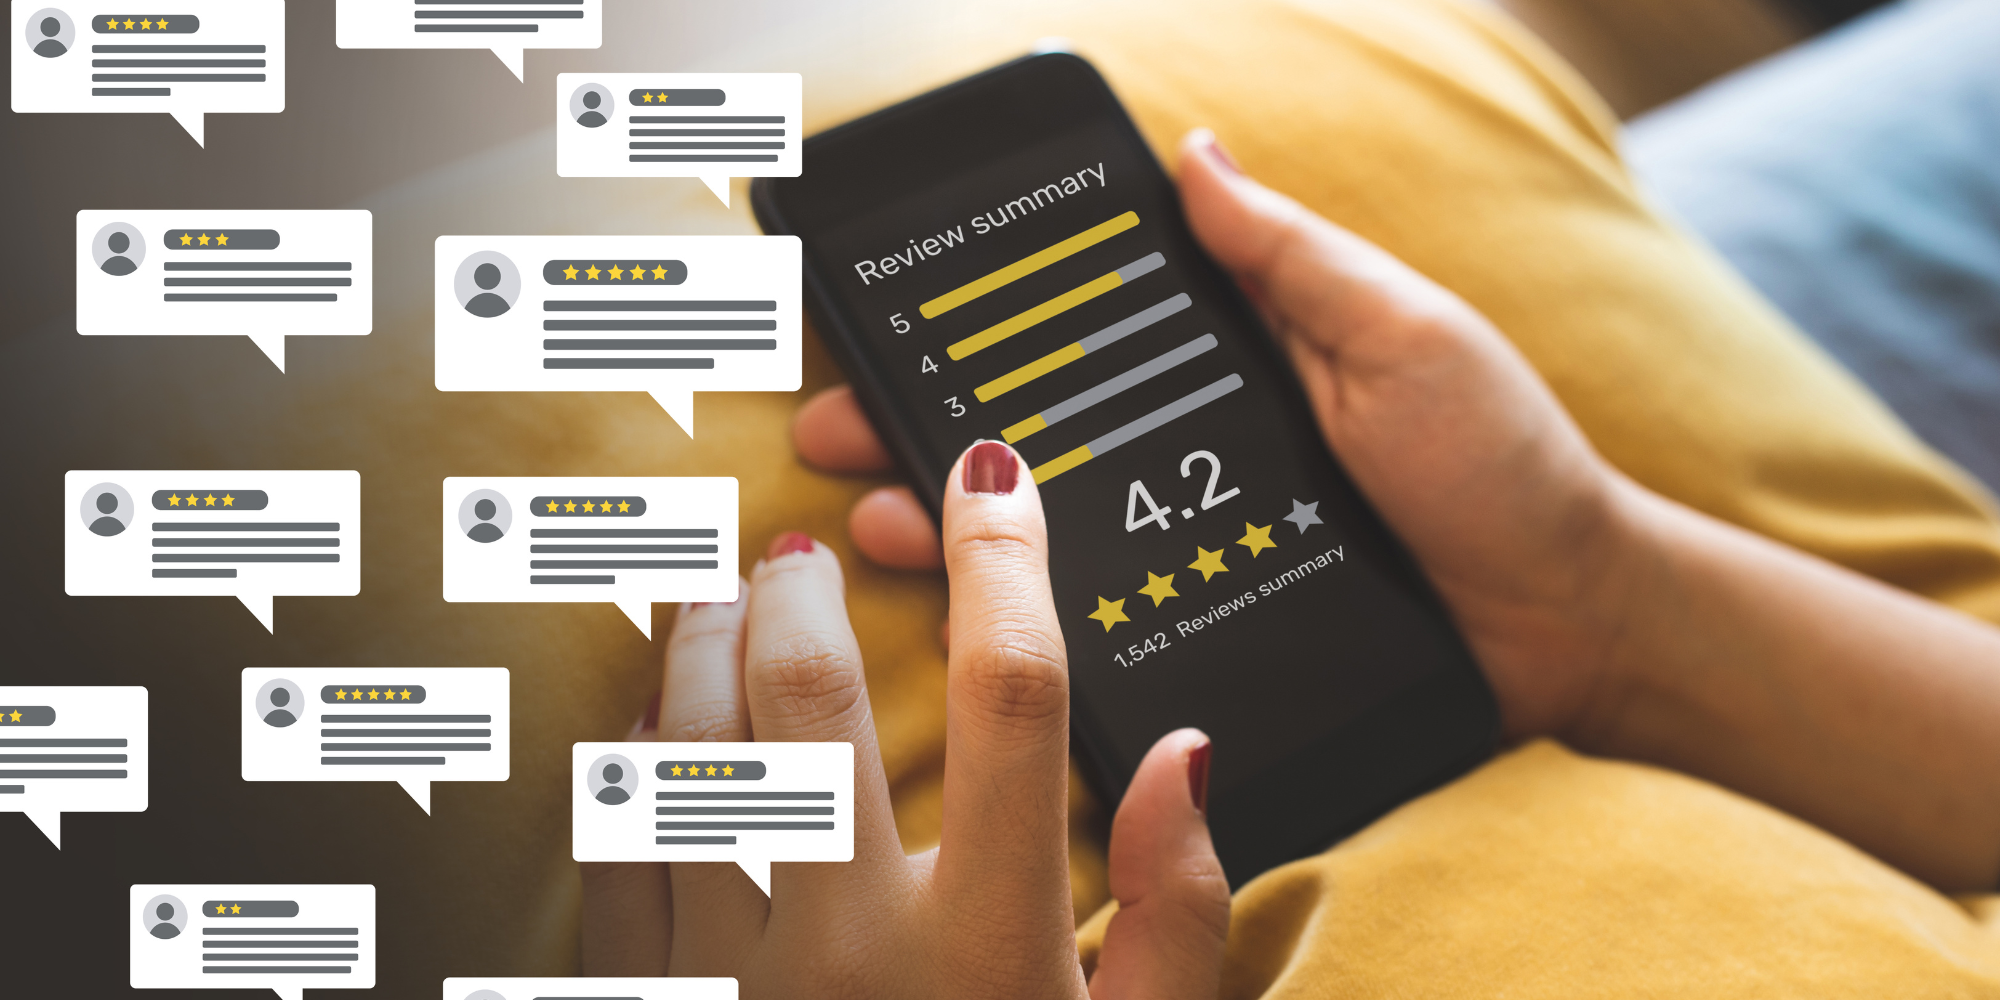 READ: How to Boost Your Employer Review Score Online